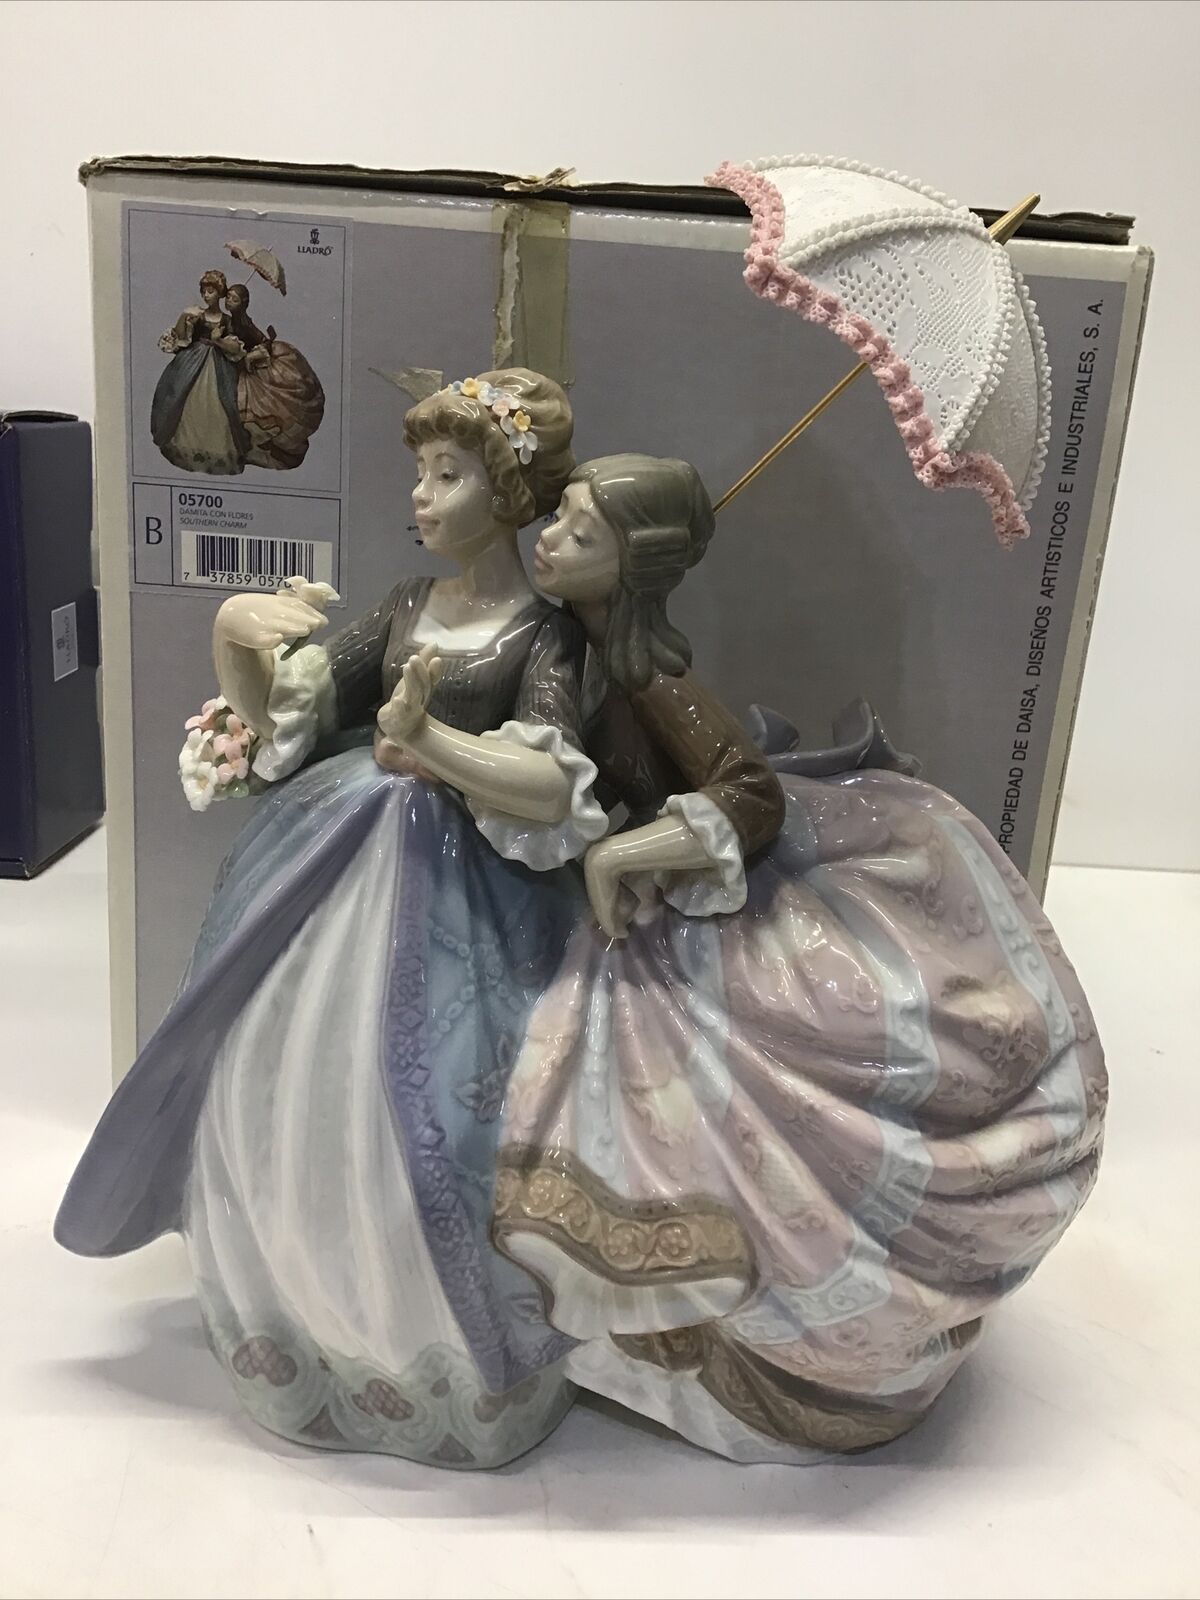 Lladro 5700 Southern Charm - Mint Condition with Original Box